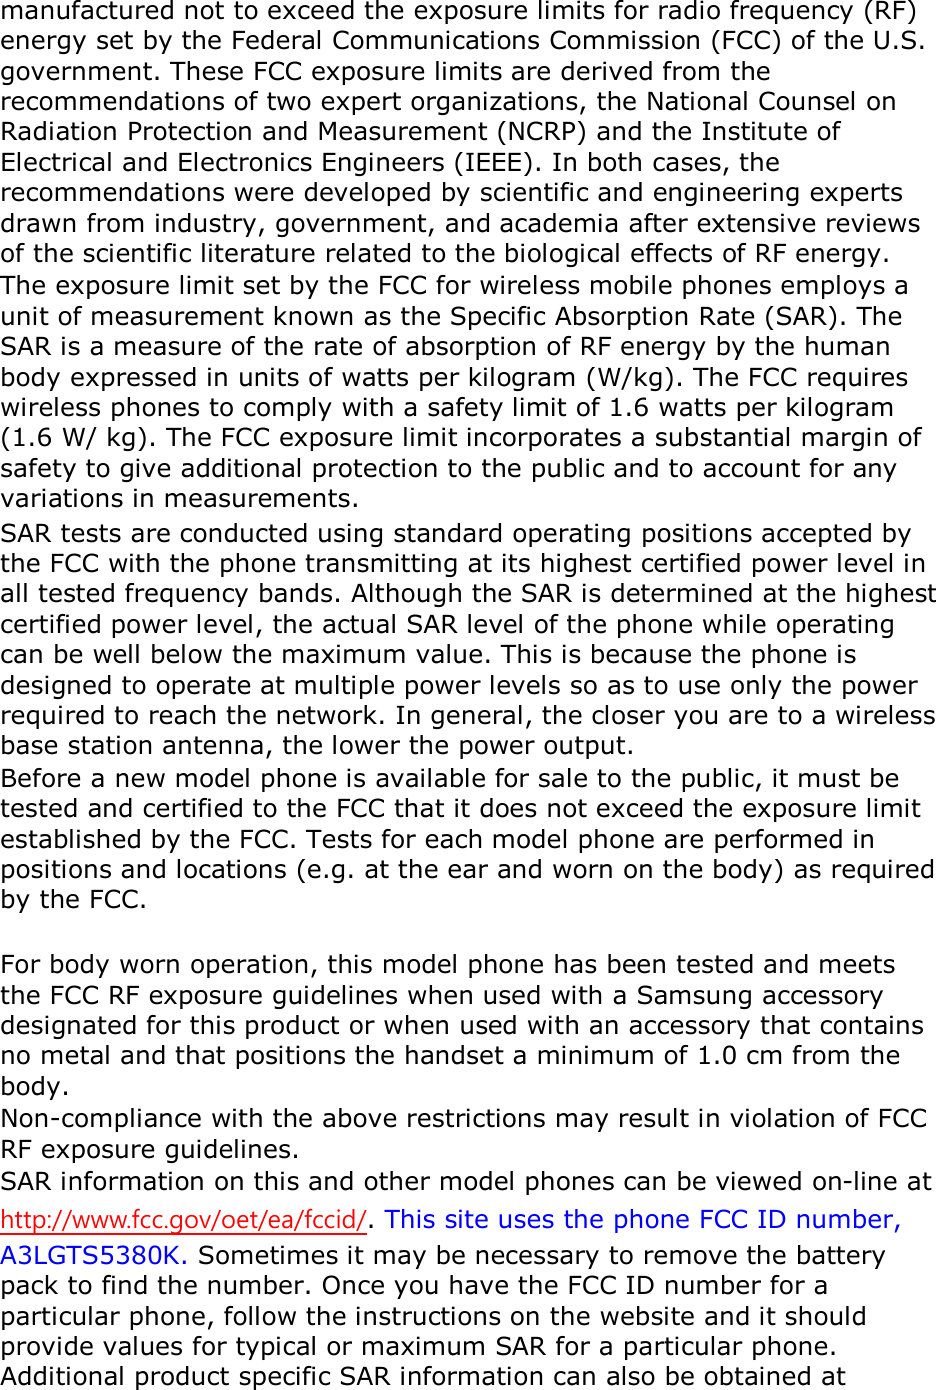 manufactured not to exceed the exposure limits for radio frequency (RF) energy set by the Federal Communications Commission (FCC) of the U.S. government. These FCC exposure limits are derived from the recommendations of two expert organizations, the National Counsel on Radiation Protection and Measurement (NCRP) and the Institute of Electrical and Electronics Engineers (IEEE). In both cases, the recommendations were developed by scientific and engineering experts drawn from industry, government, and academia after extensive reviews of the scientific literature related to the biological effects of RF energy. The exposure limit set by the FCC for wireless mobile phones employs a unit of measurement known as the Specific Absorption Rate (SAR). The SAR is a measure of the rate of absorption of RF energy by the human body expressed in units of watts per kilogram (W/kg). The FCC requires wireless phones to comply with a safety limit of 1.6 watts per kilogram (1.6 W/ kg). The FCC exposure limit incorporates a substantial margin of safety to give additional protection to the public and to account for any variations in measurements. SAR tests are conducted using standard operating positions accepted by the FCC with the phone transmitting at its highest certified power level in all tested frequency bands. Although the SAR is determined at the highest certified power level, the actual SAR level of the phone while operating can be well below the maximum value. This is because the phone is designed to operate at multiple power levels so as to use only the power required to reach the network. In general, the closer you are to a wireless base station antenna, the lower the power output. Before a new model phone is available for sale to the public, it must be tested and certified to the FCC that it does not exceed the exposure limit established by the FCC. Tests for each model phone are performed in positions and locations (e.g. at the ear and worn on the body) as required by the FCC.      For body worn operation, this model phone has been tested and meets the FCC RF exposure guidelines when used with a Samsung accessory designated for this product or when used with an accessory that contains no metal and that positions the handset a minimum of 1.0 cm from the body.   Non-compliance with the above restrictions may result in violation of FCC RF exposure guidelines. SAR information on this and other model phones can be viewed on-line at http://www.fcc.gov/oet/ea/fccid/. This site uses the phone FCC ID number, A3LGTS5380K. Sometimes it may be necessary to remove the battery pack to find the number. Once you have the FCC ID number for a particular phone, follow the instructions on the website and it should provide values for typical or maximum SAR for a particular phone. Additional product specific SAR information can also be obtained at 